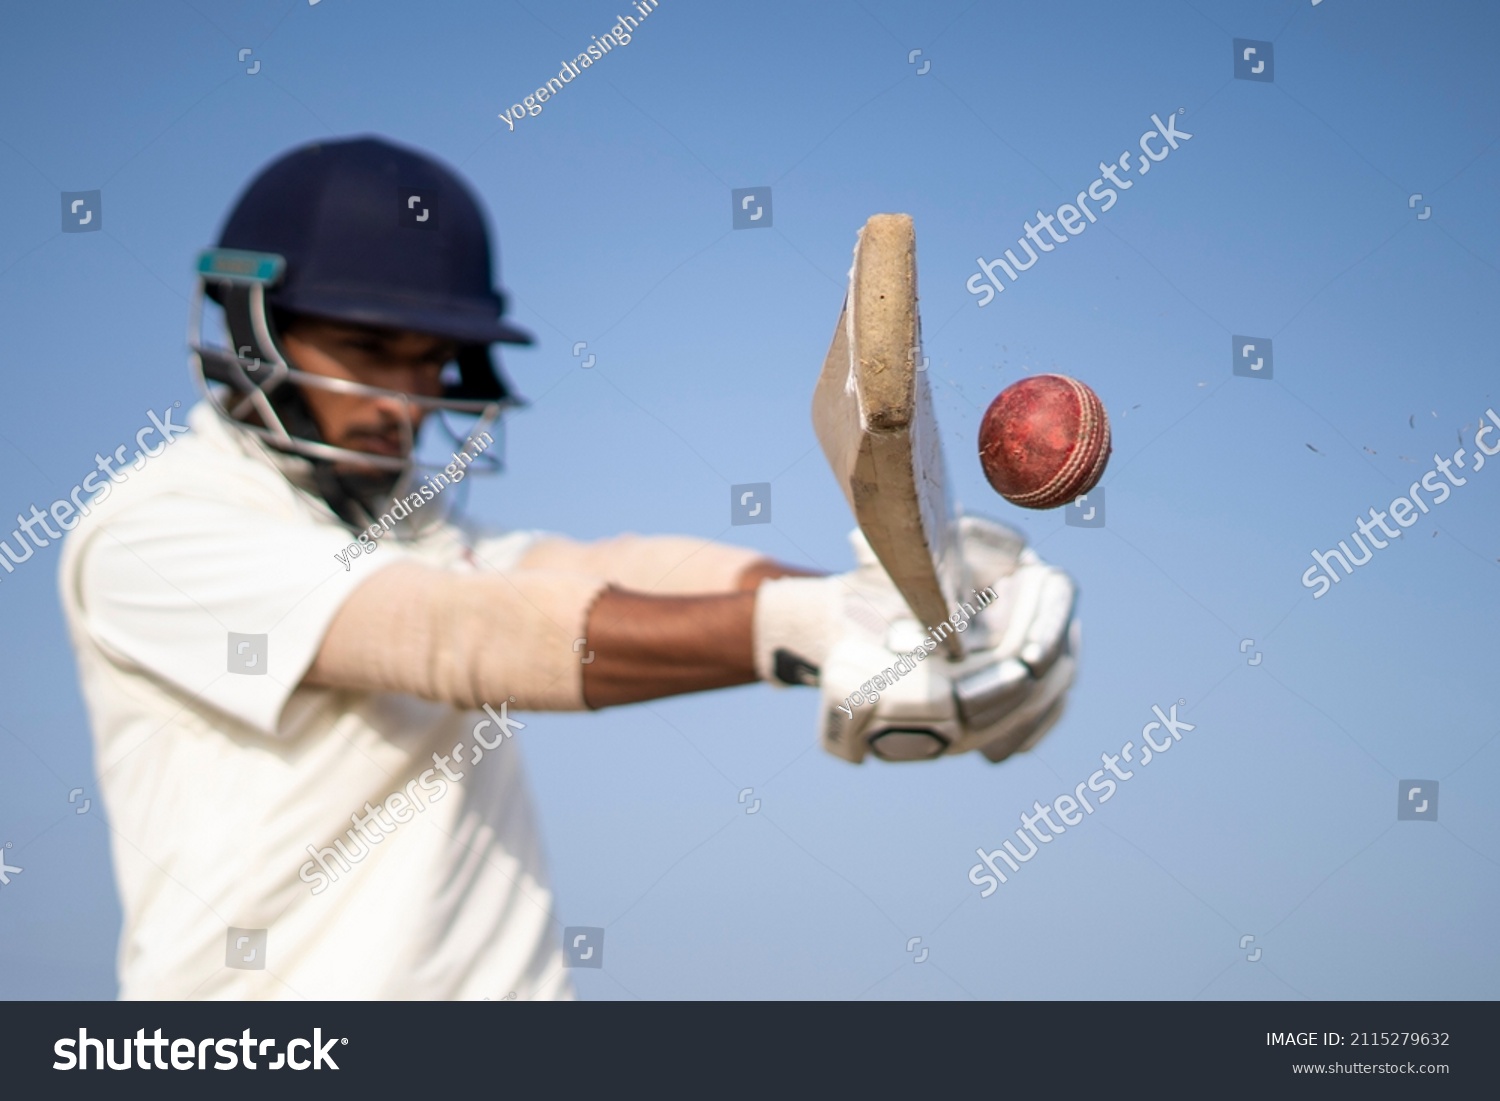 A cricketer playing cricket on the pitch in white dress for test matches. Sportsperson hitting a shot on the cricket ball. #2115279632